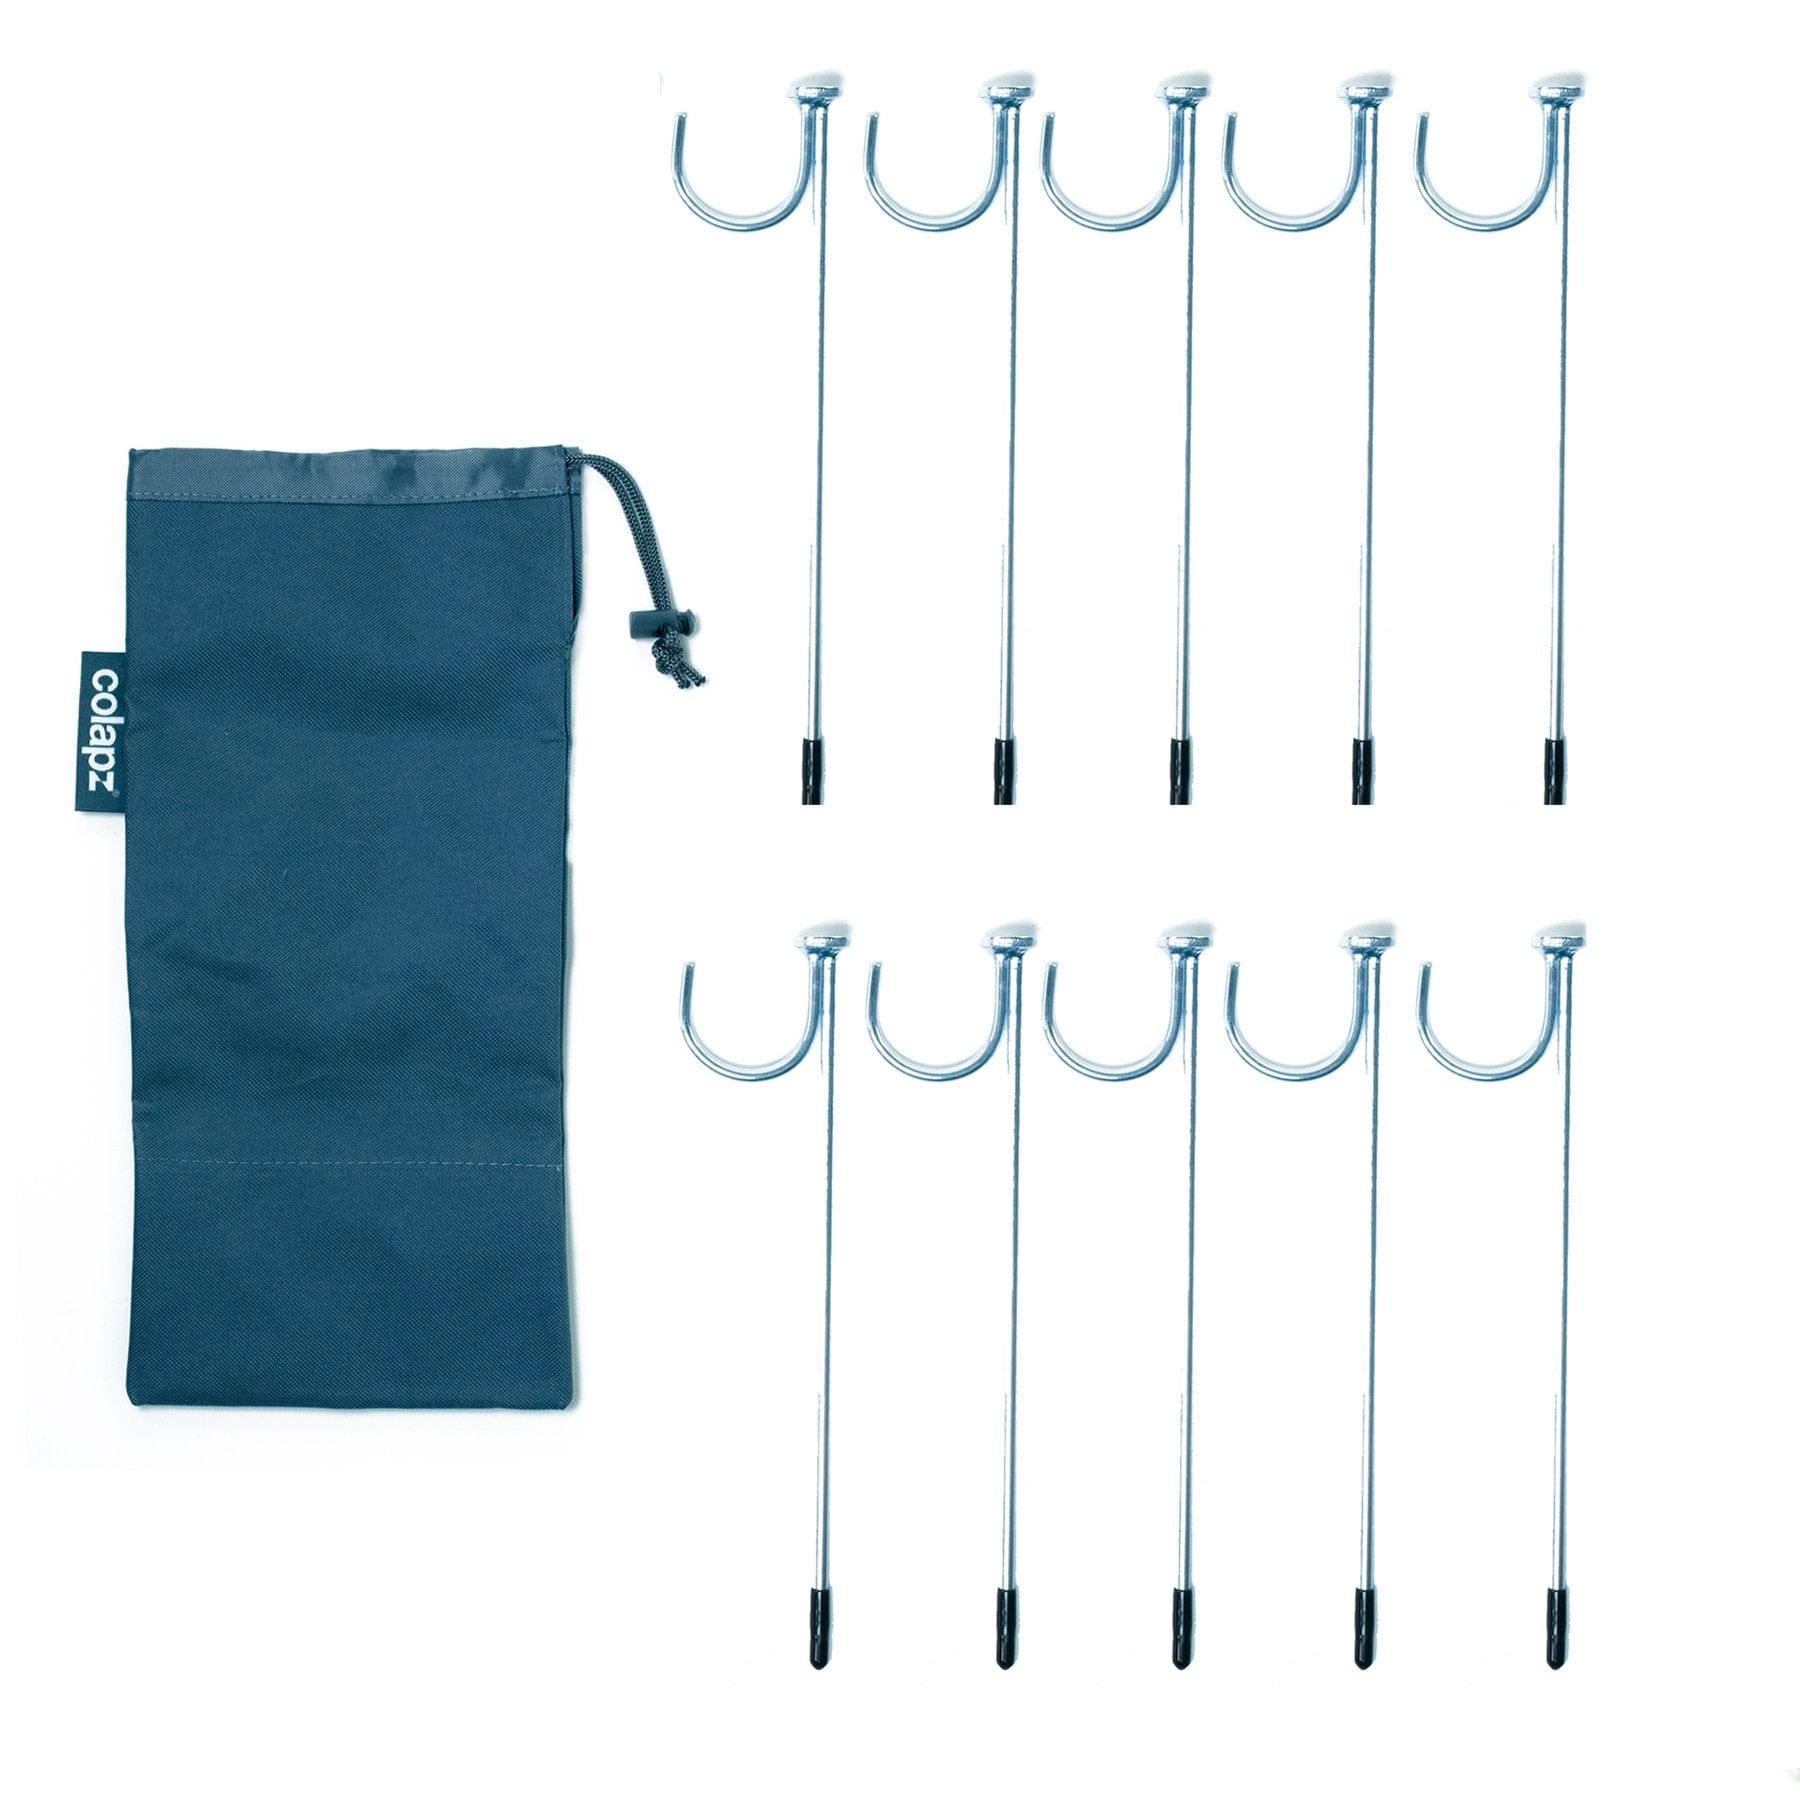 Hoses & Brushes Water Metal Support Pegs – Pack of 10 Collapsible Waste Outlet Connection Kit